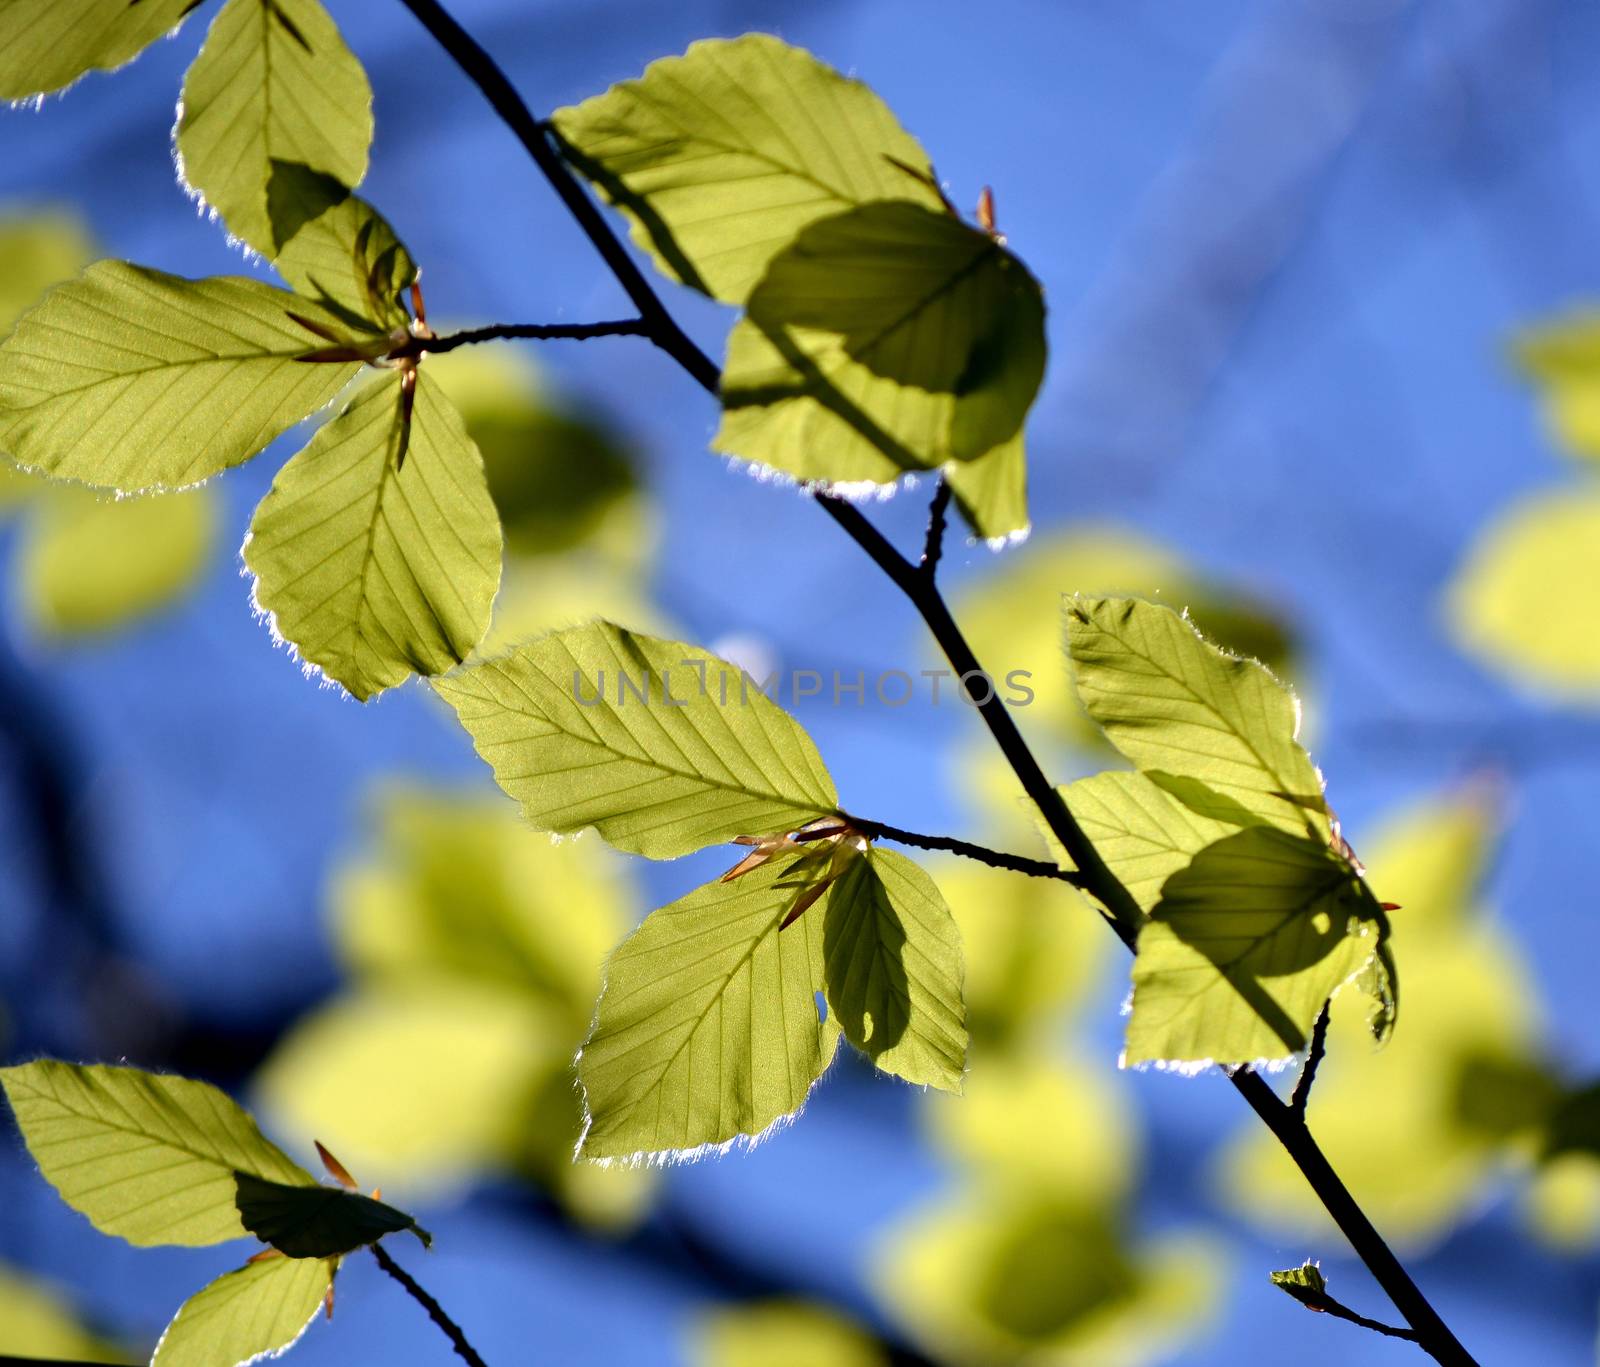 Green leaves on blue sky by hibrida13